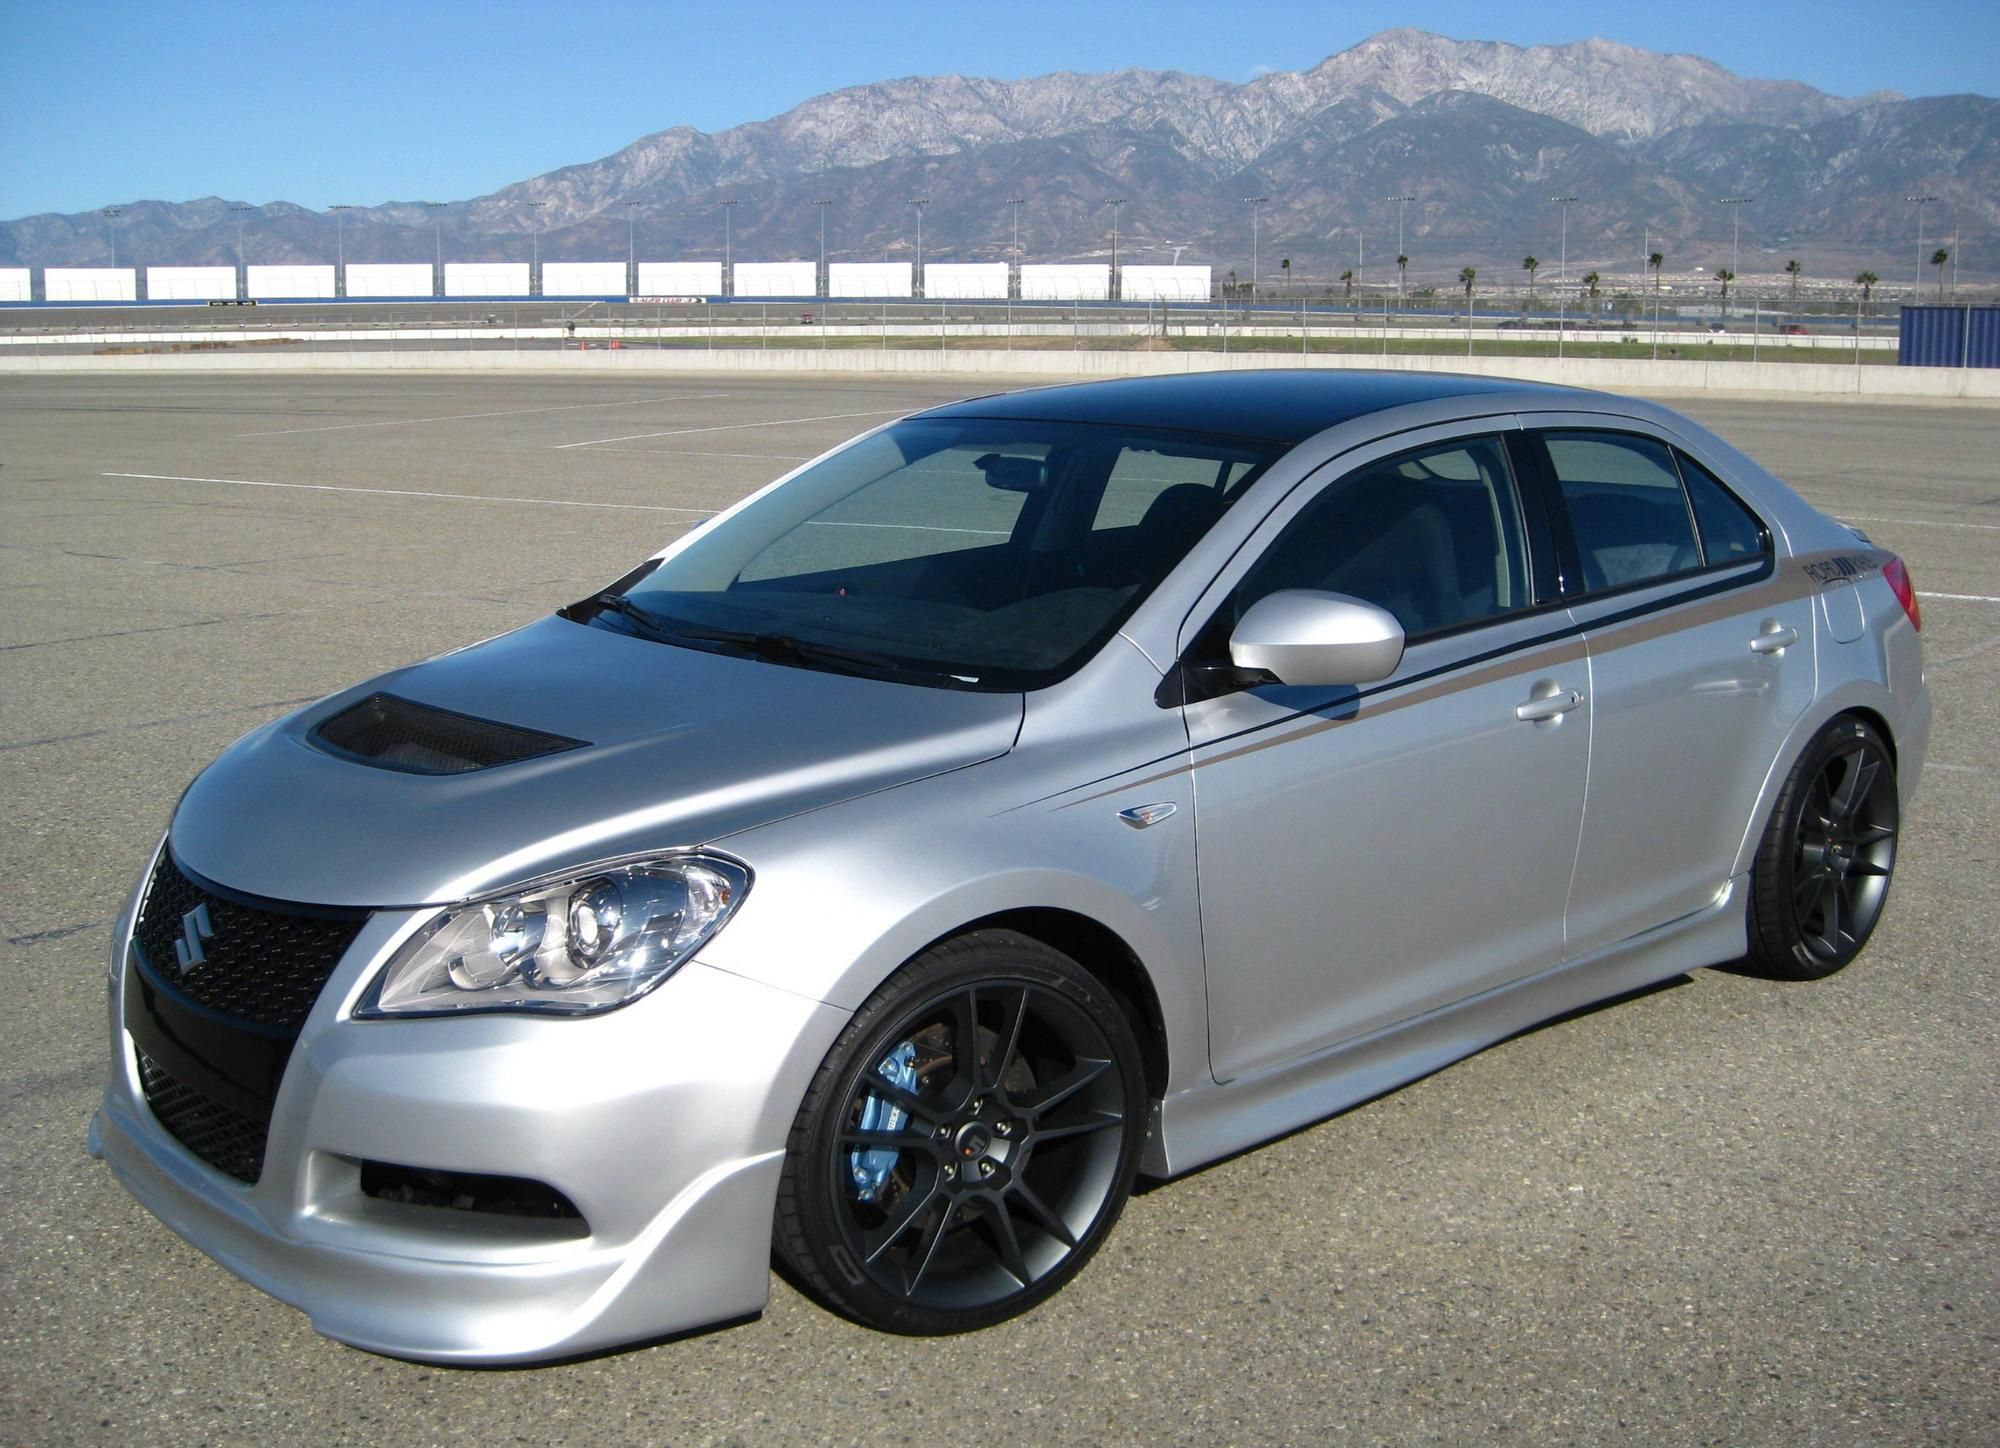 The Suzuki Kizashi will be well represented at SEMA with four unique  creations